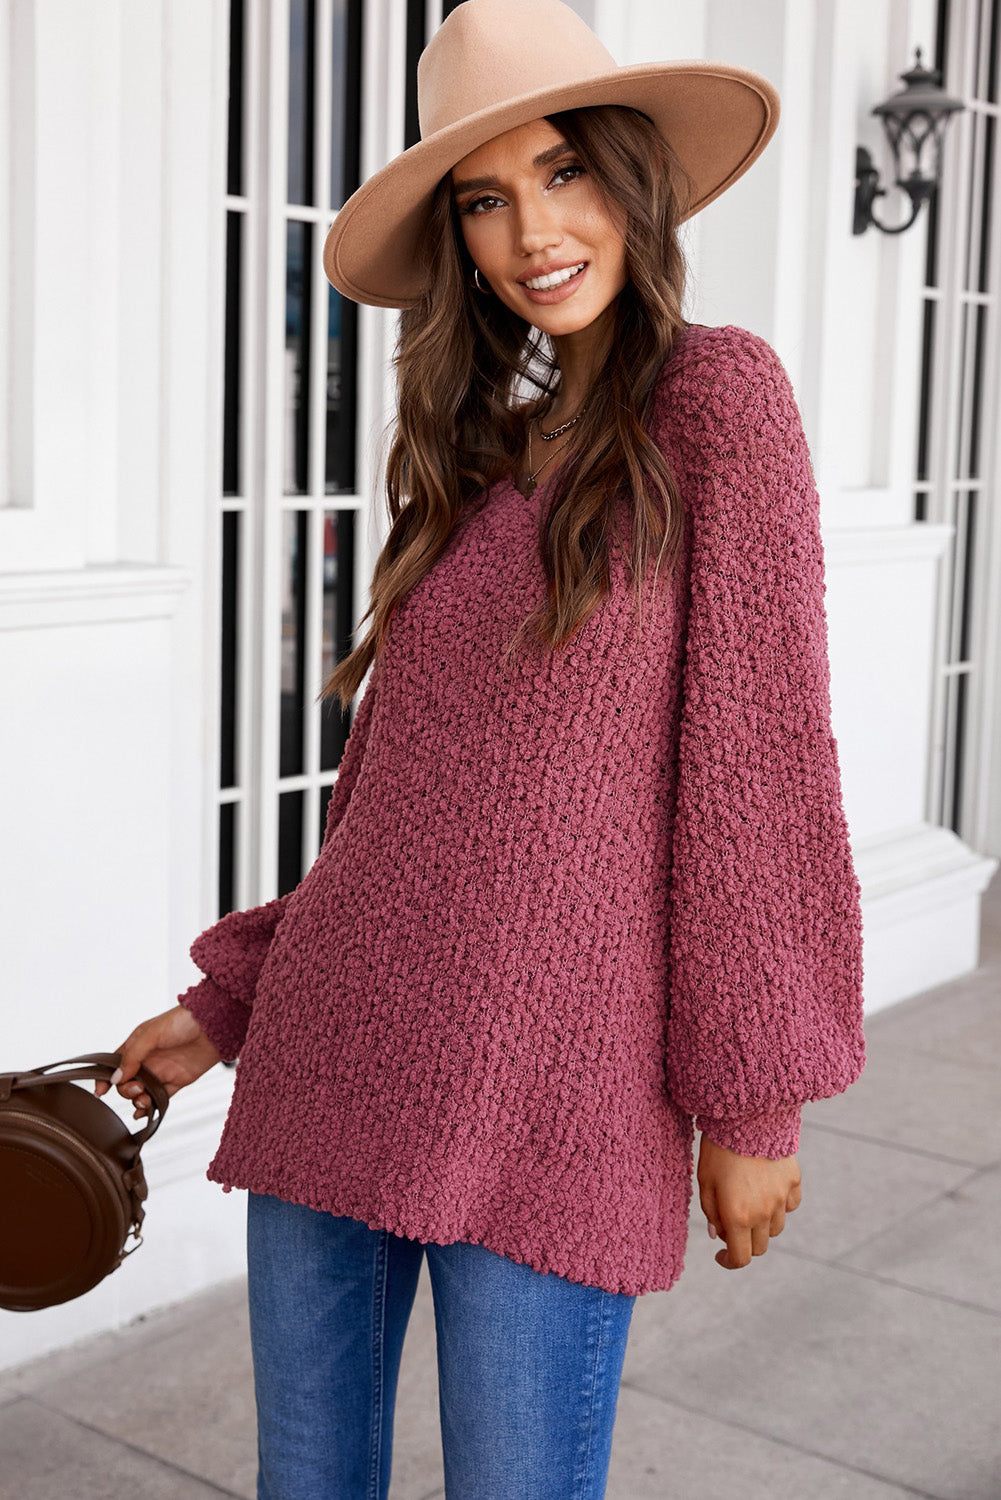 Red Pink/Khaki/Apricot Chill in The Air Sweater LC270016-103